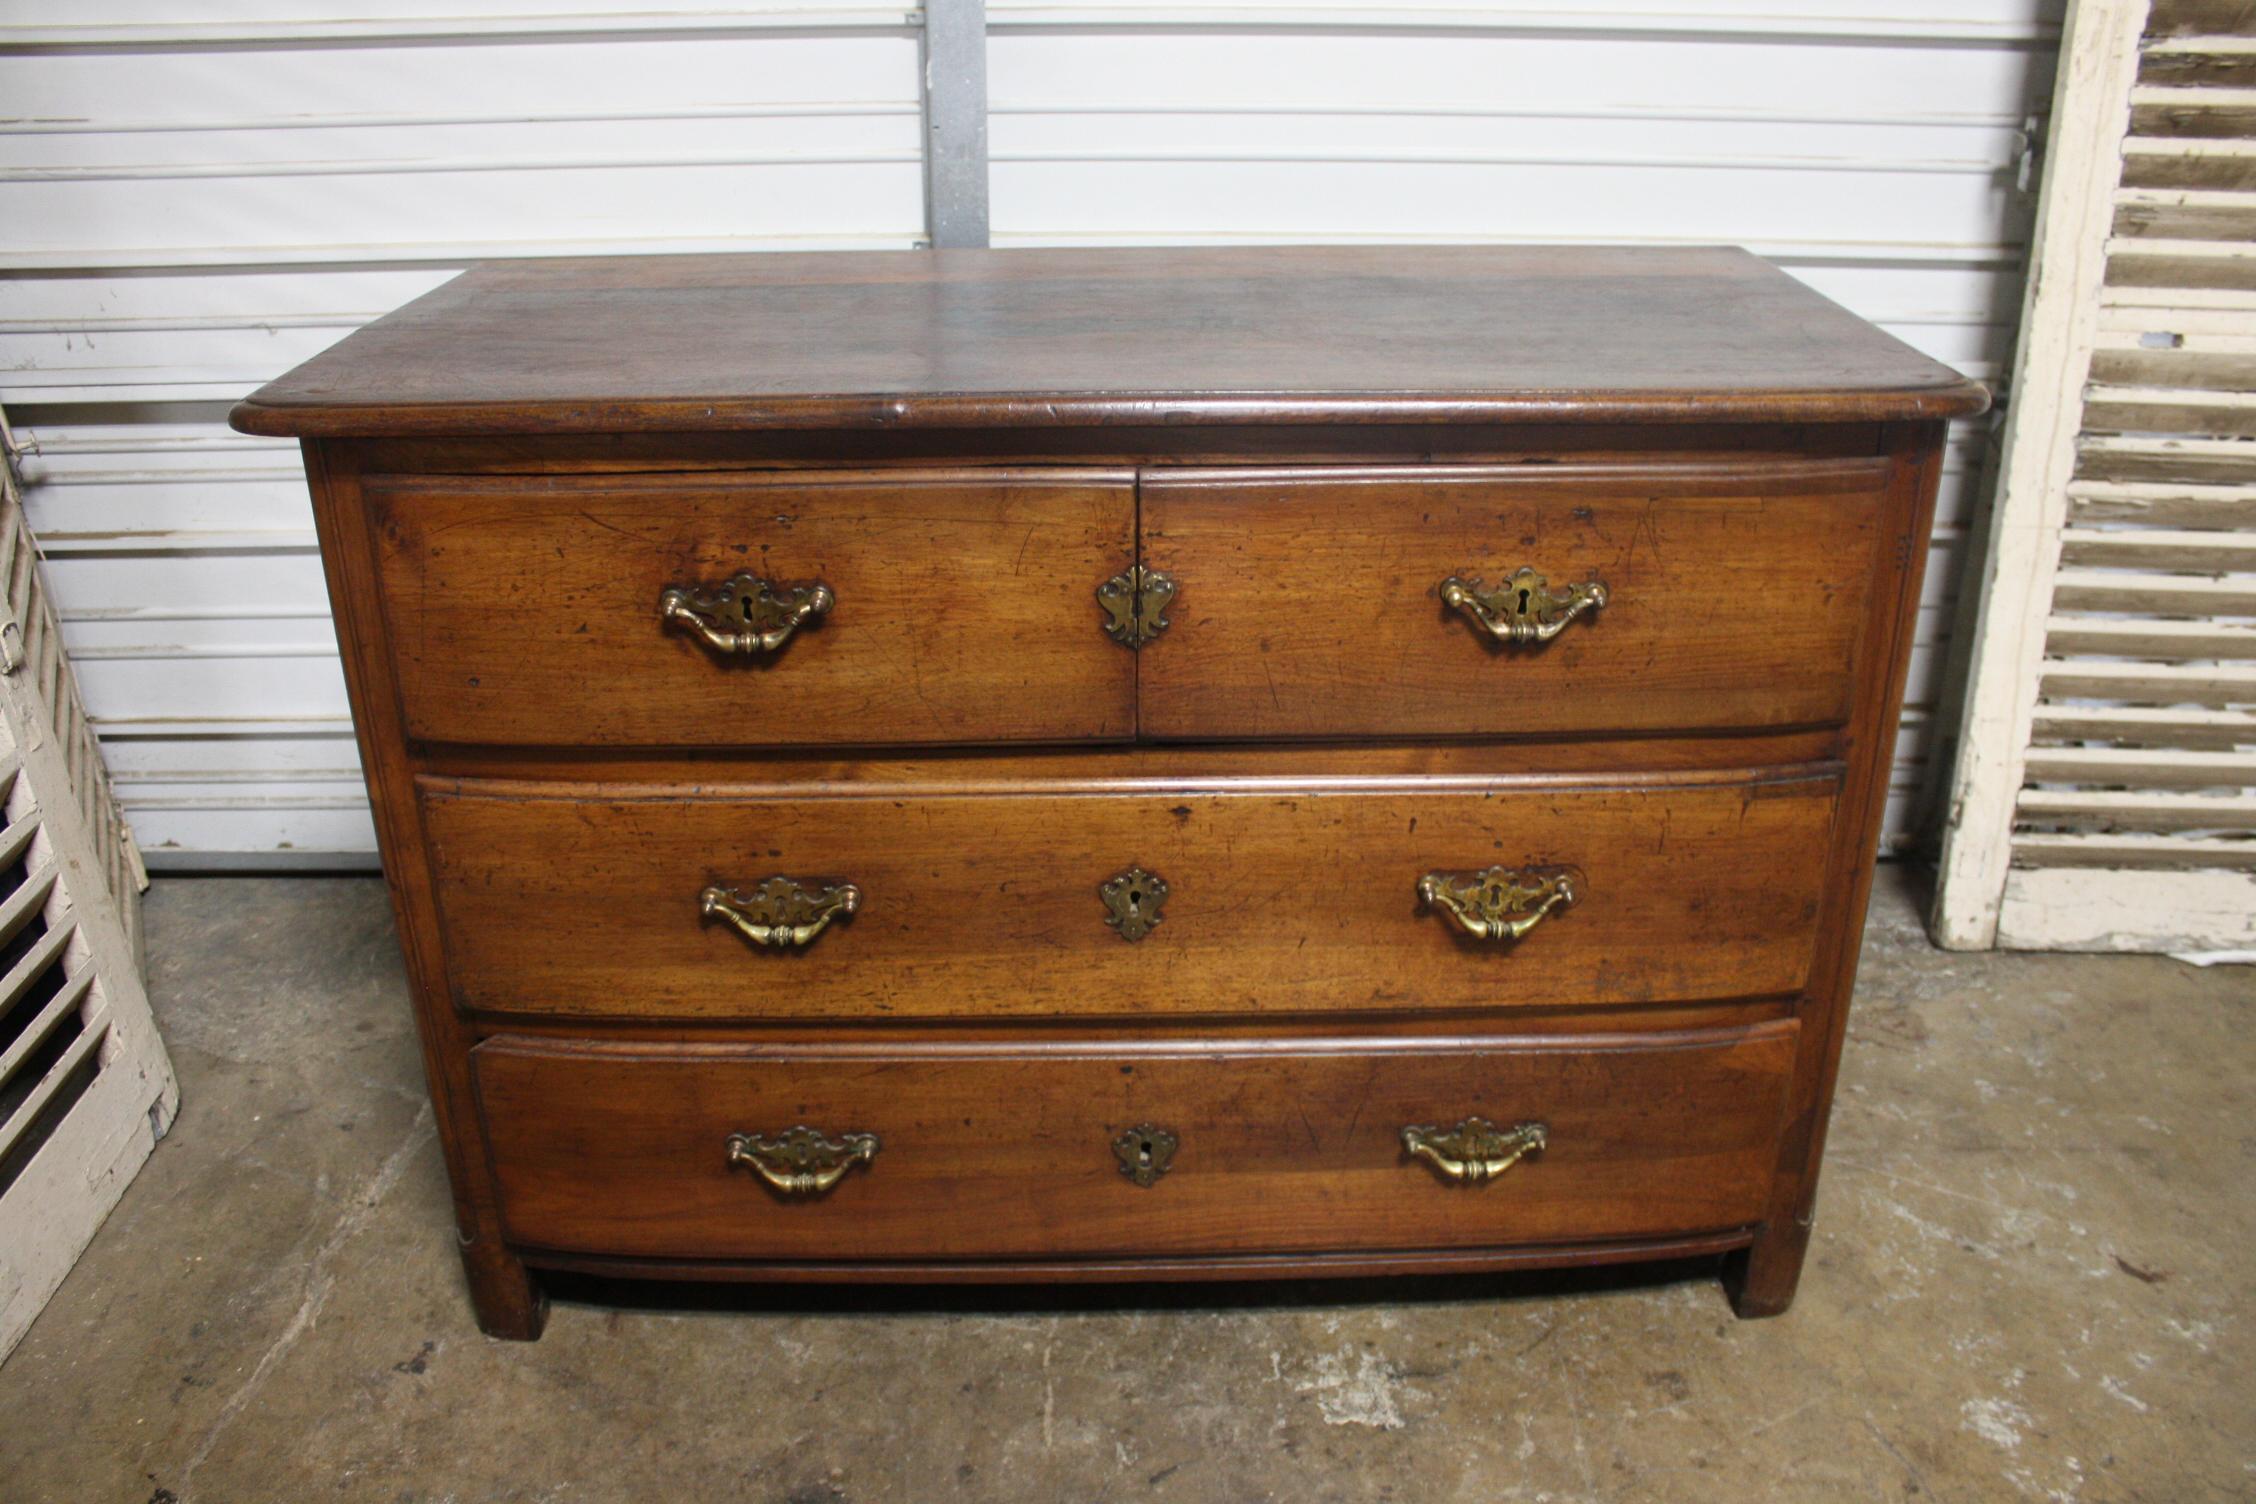 This commode wear a wonderful patine due to the age. The keyhole entry and hardware are original.